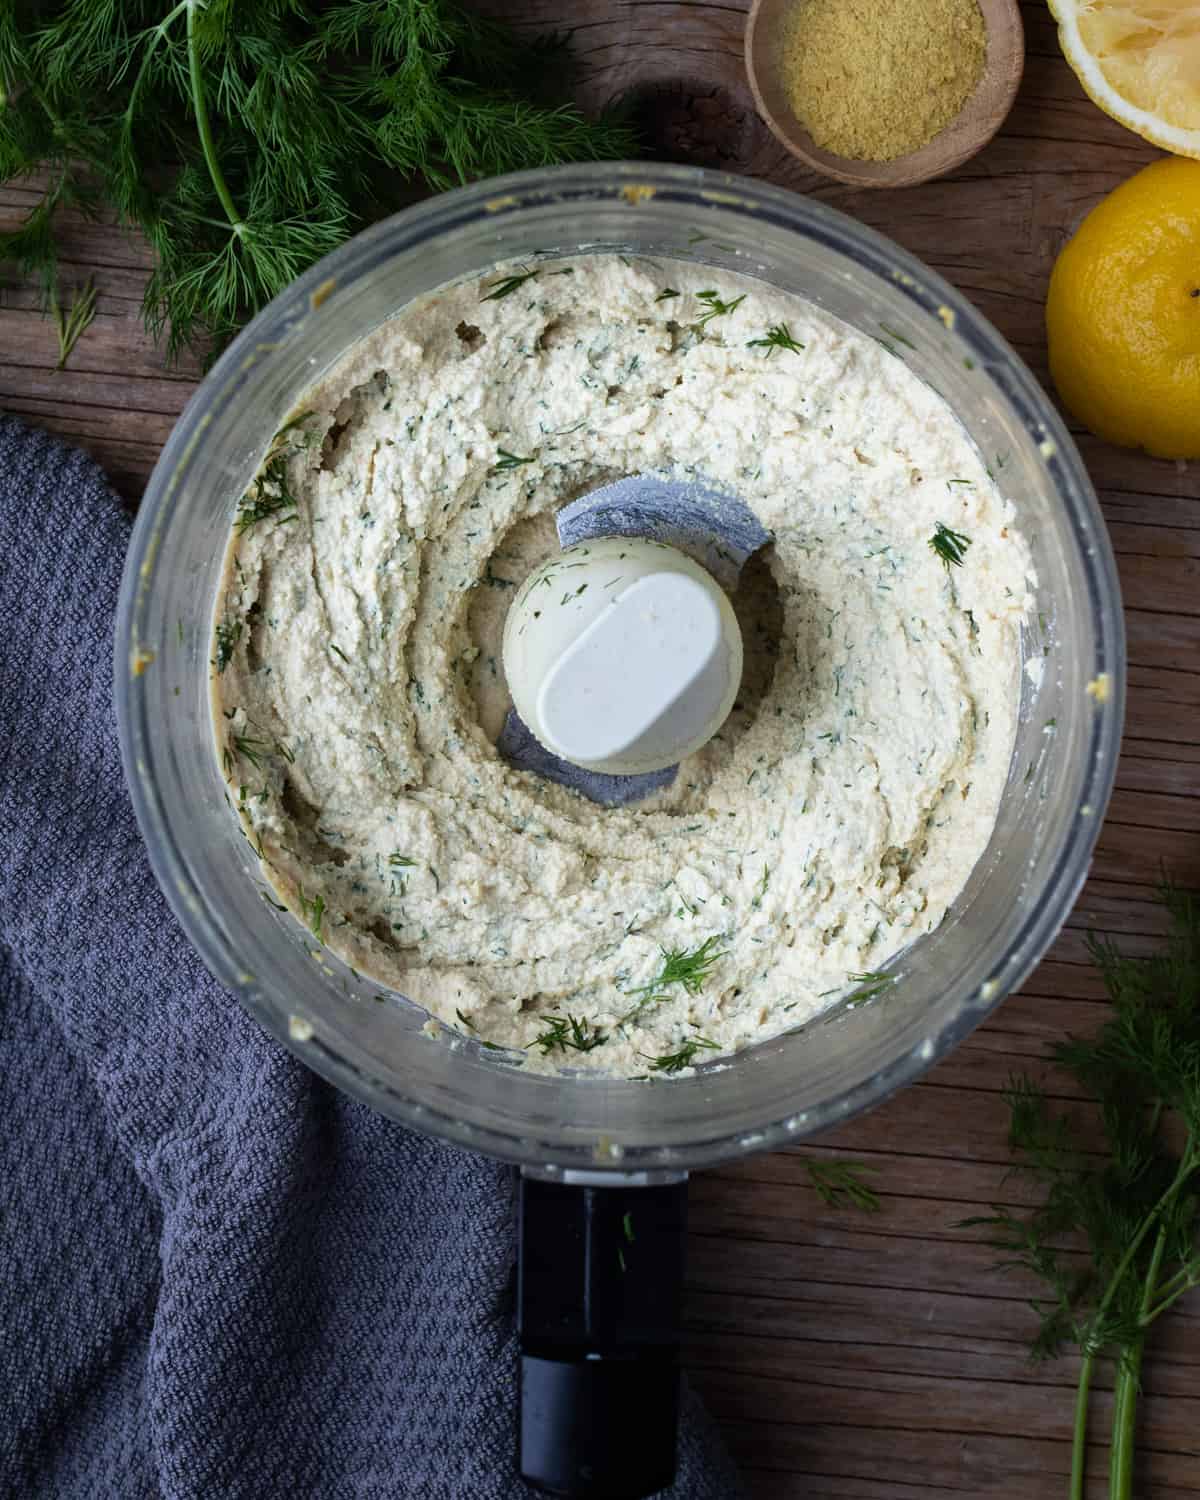 Overhead shot of a food processor on a wooden table with tofu, spices, and, and parsley inside that has been processed into a creamy vegan ricotta cheese